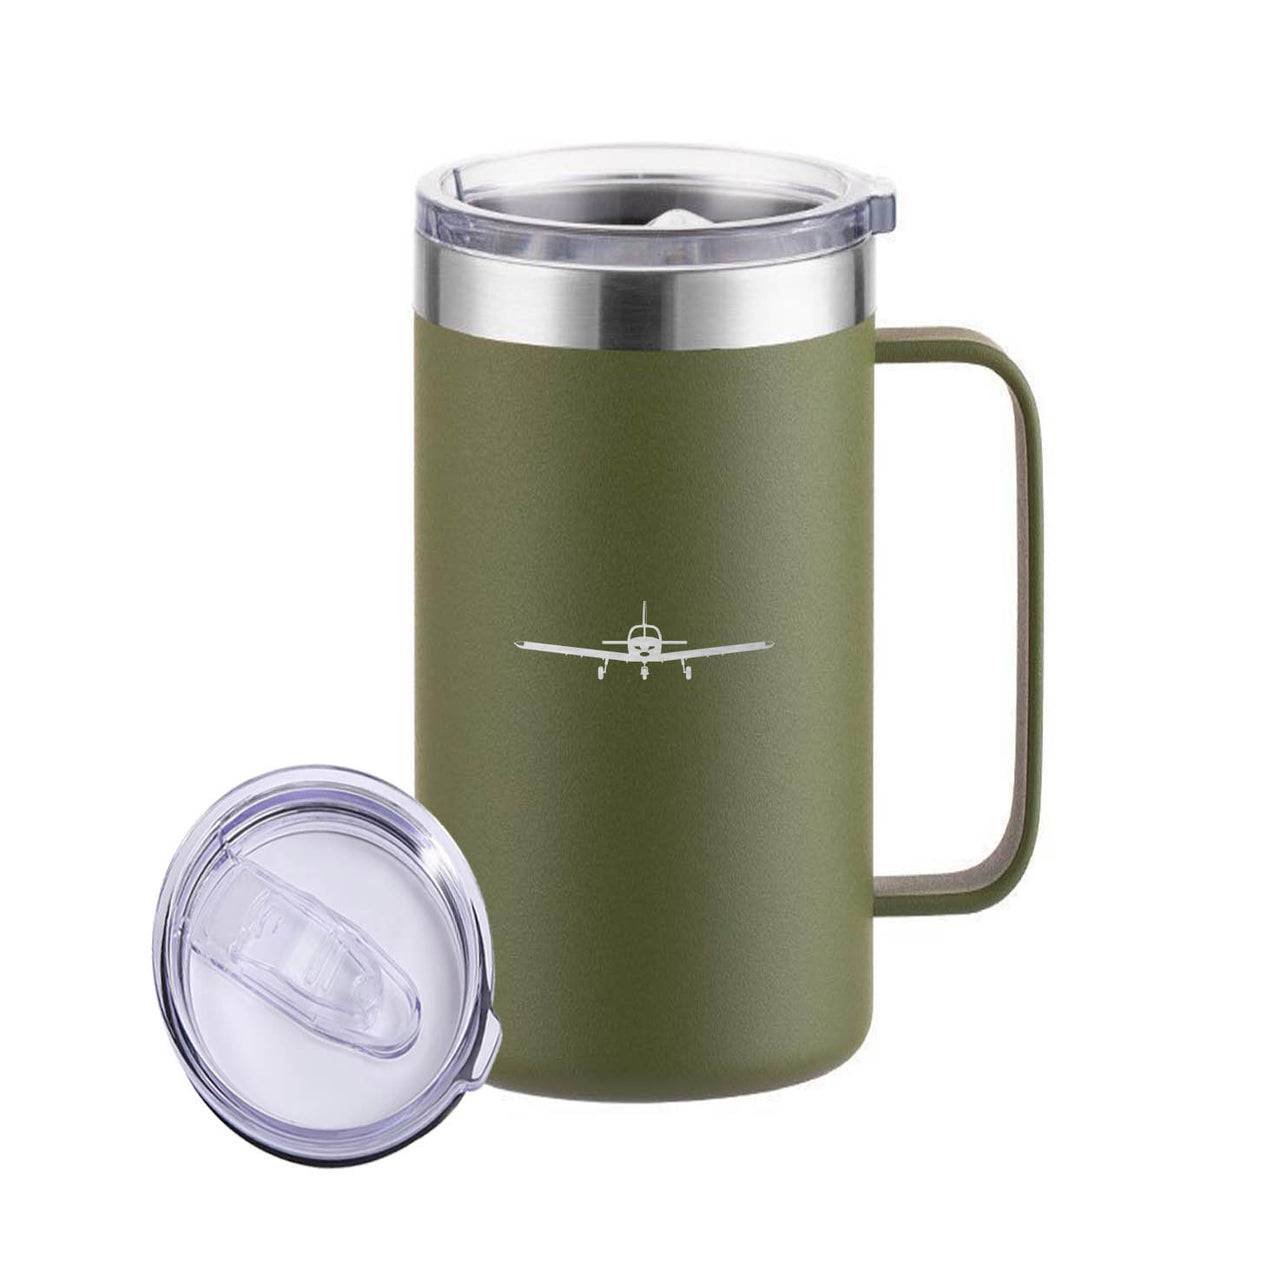 Piper PA28 Silhouette Plane Designed Stainless Steel Beer Mugs